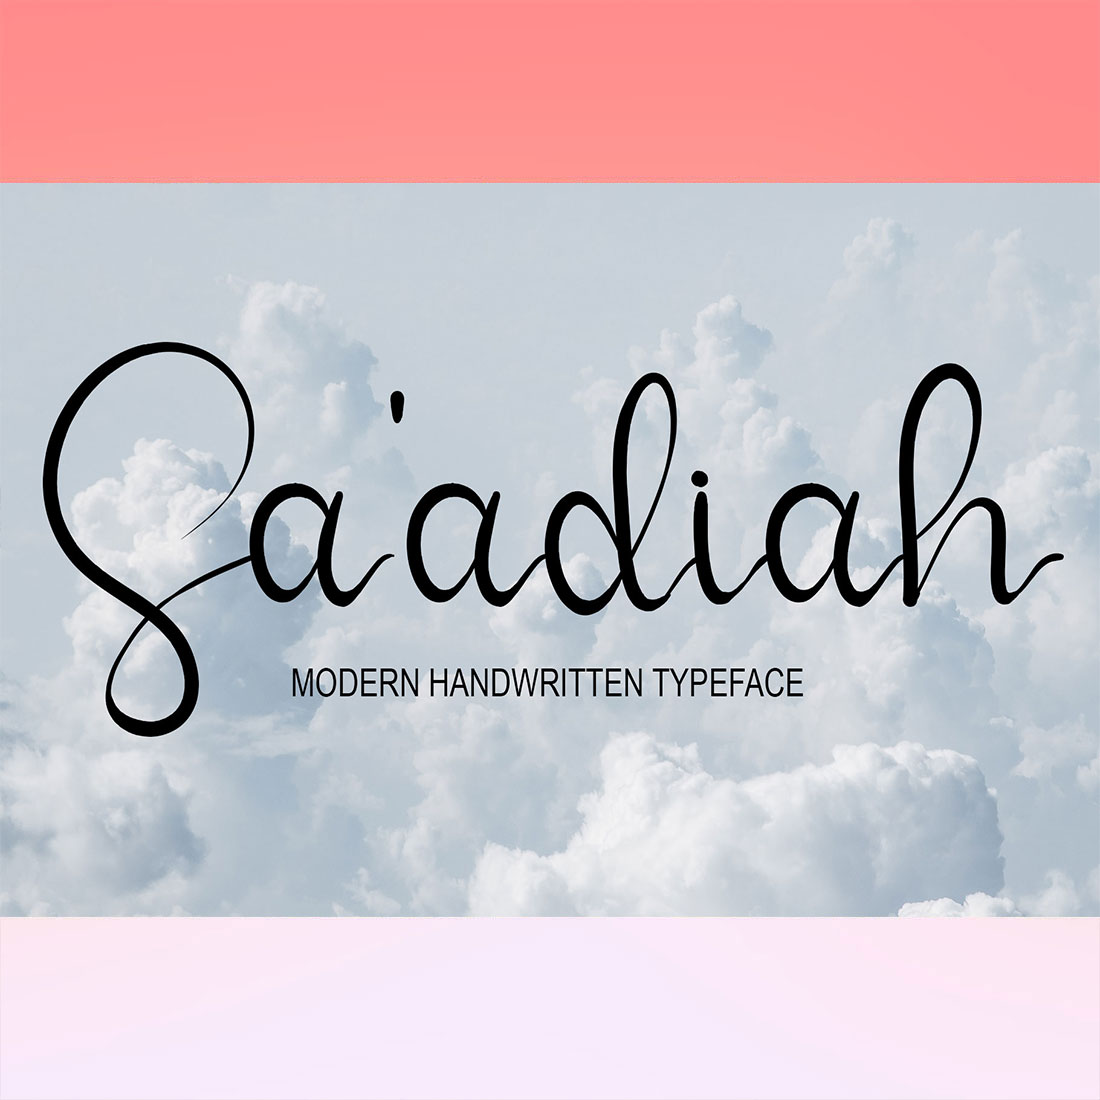 The word saadah written in black on a pink and white background.